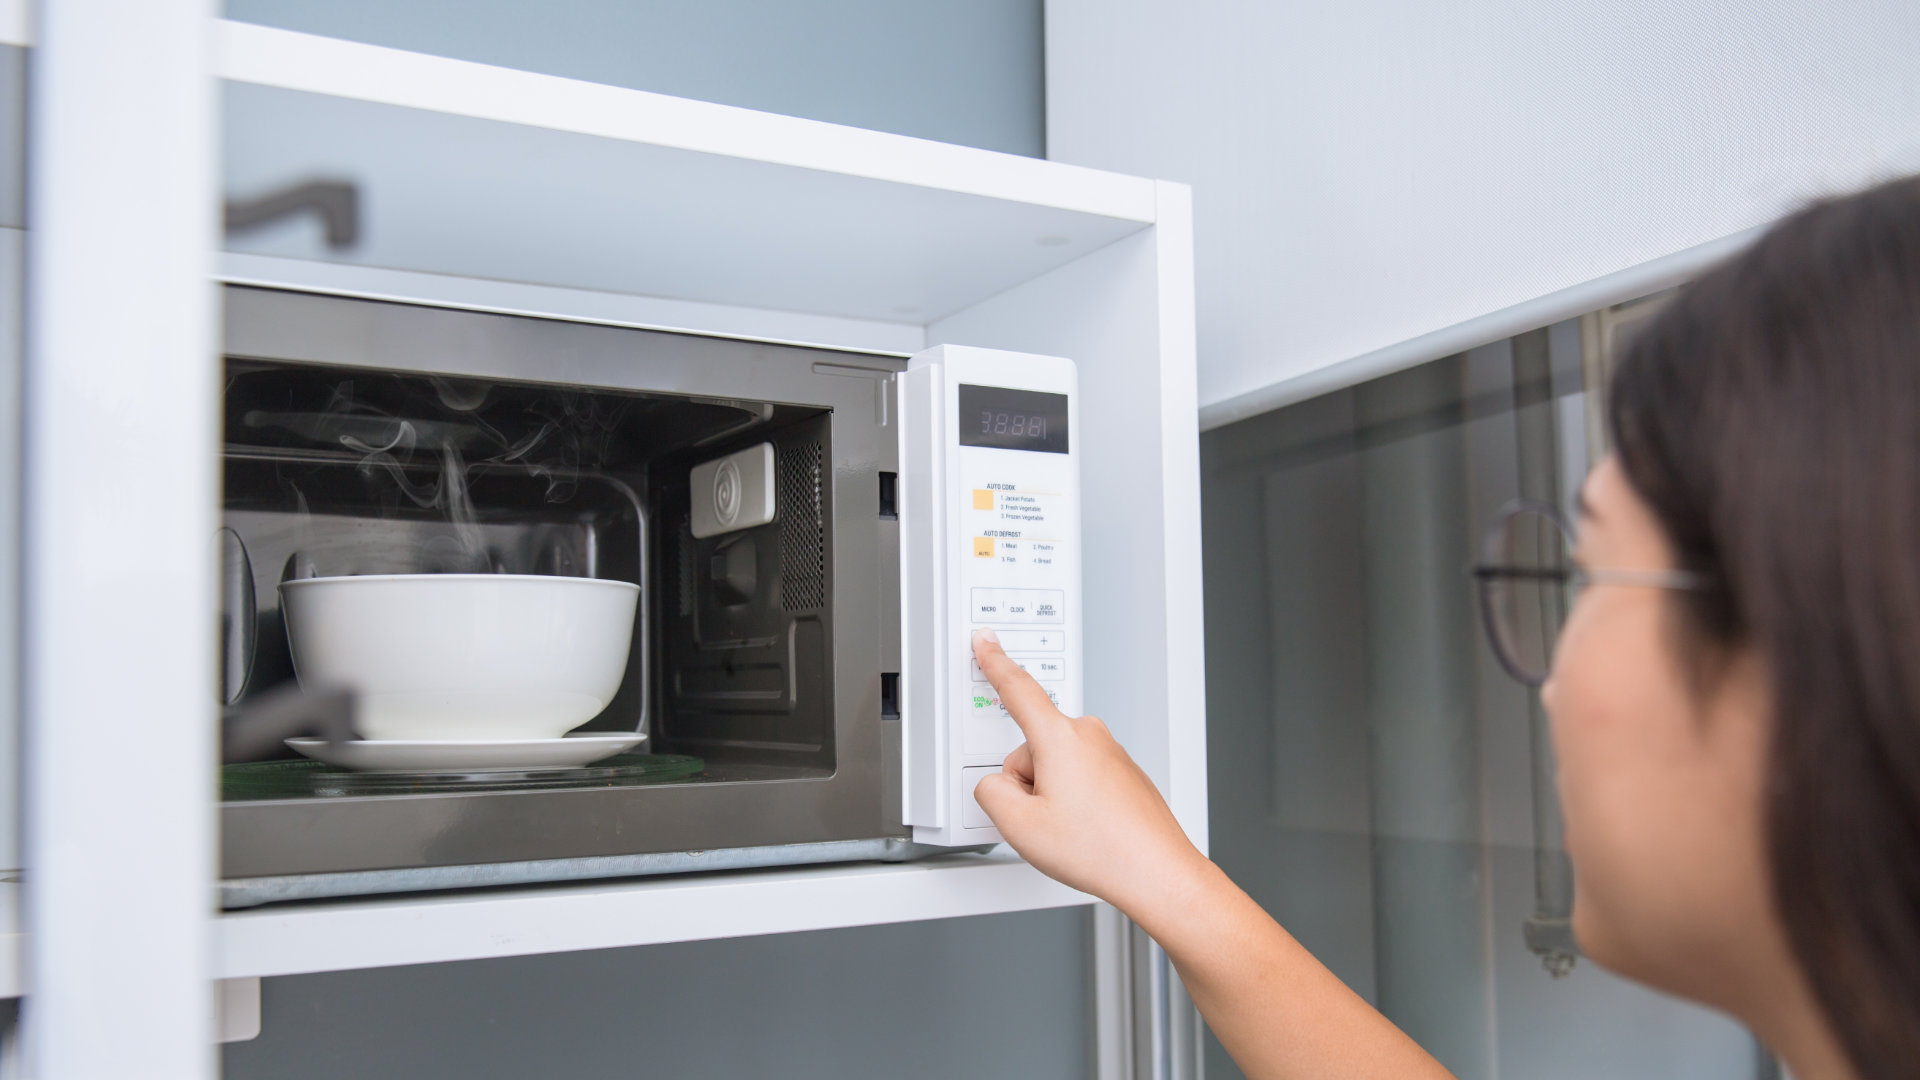 When Should You Repair or Replace Your Microwave? - Appliance Express